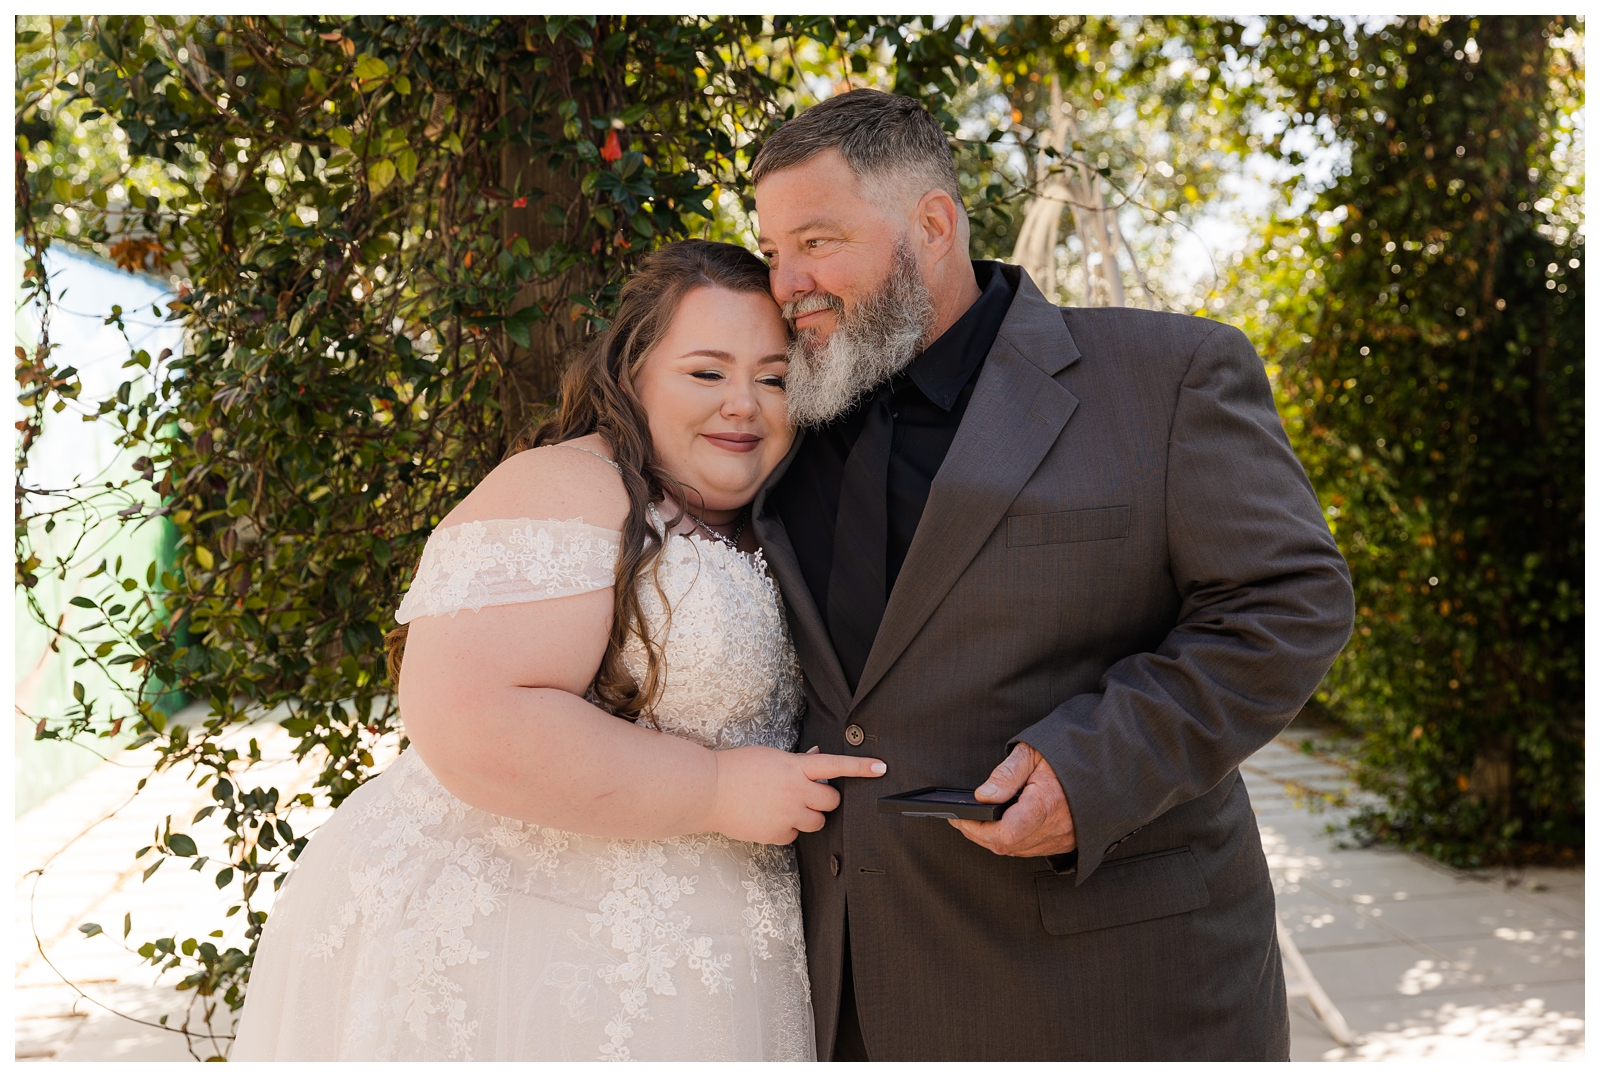 Father and daughter first look on wedding day